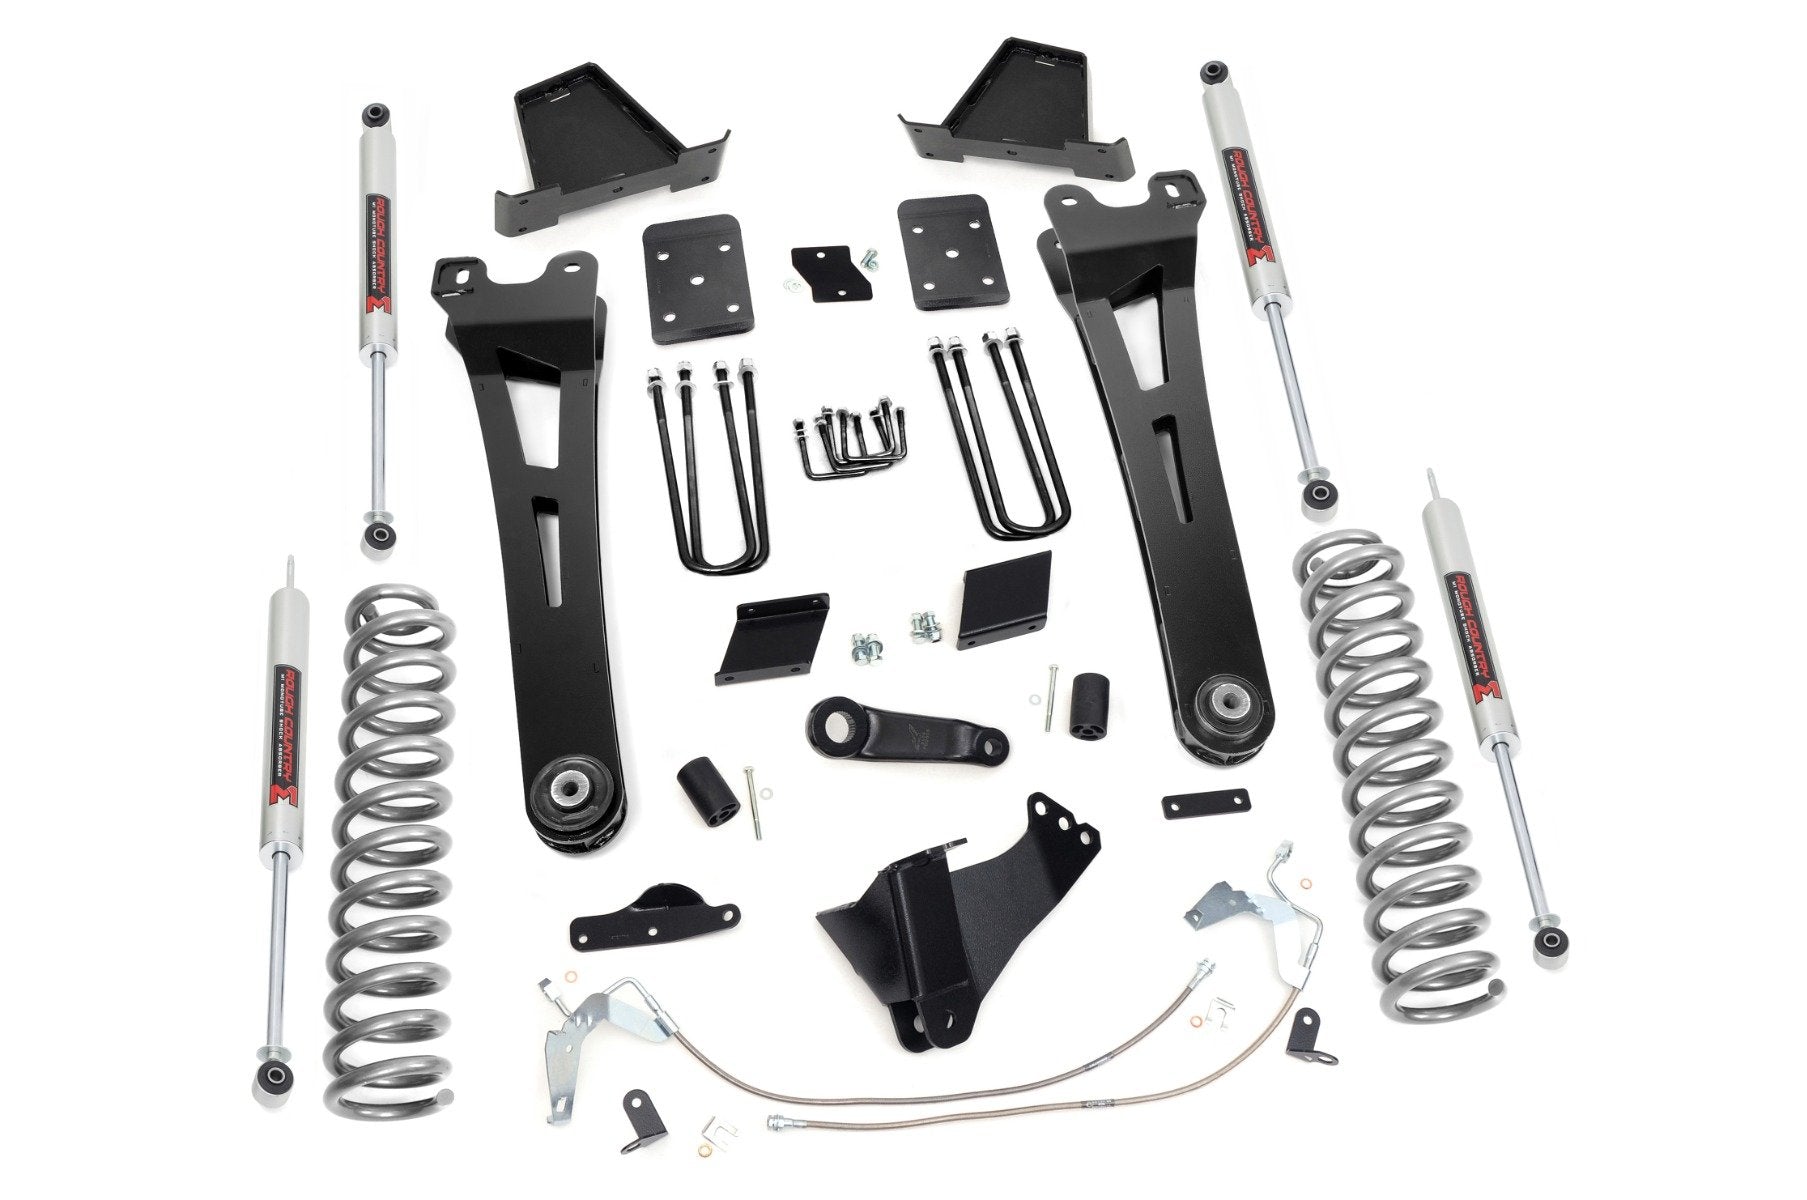 Rough Country 6 Inch Lift Kit | Diesel | Radius Arm | M1 | Ford F-250 Super Duty 4WD (15-16)